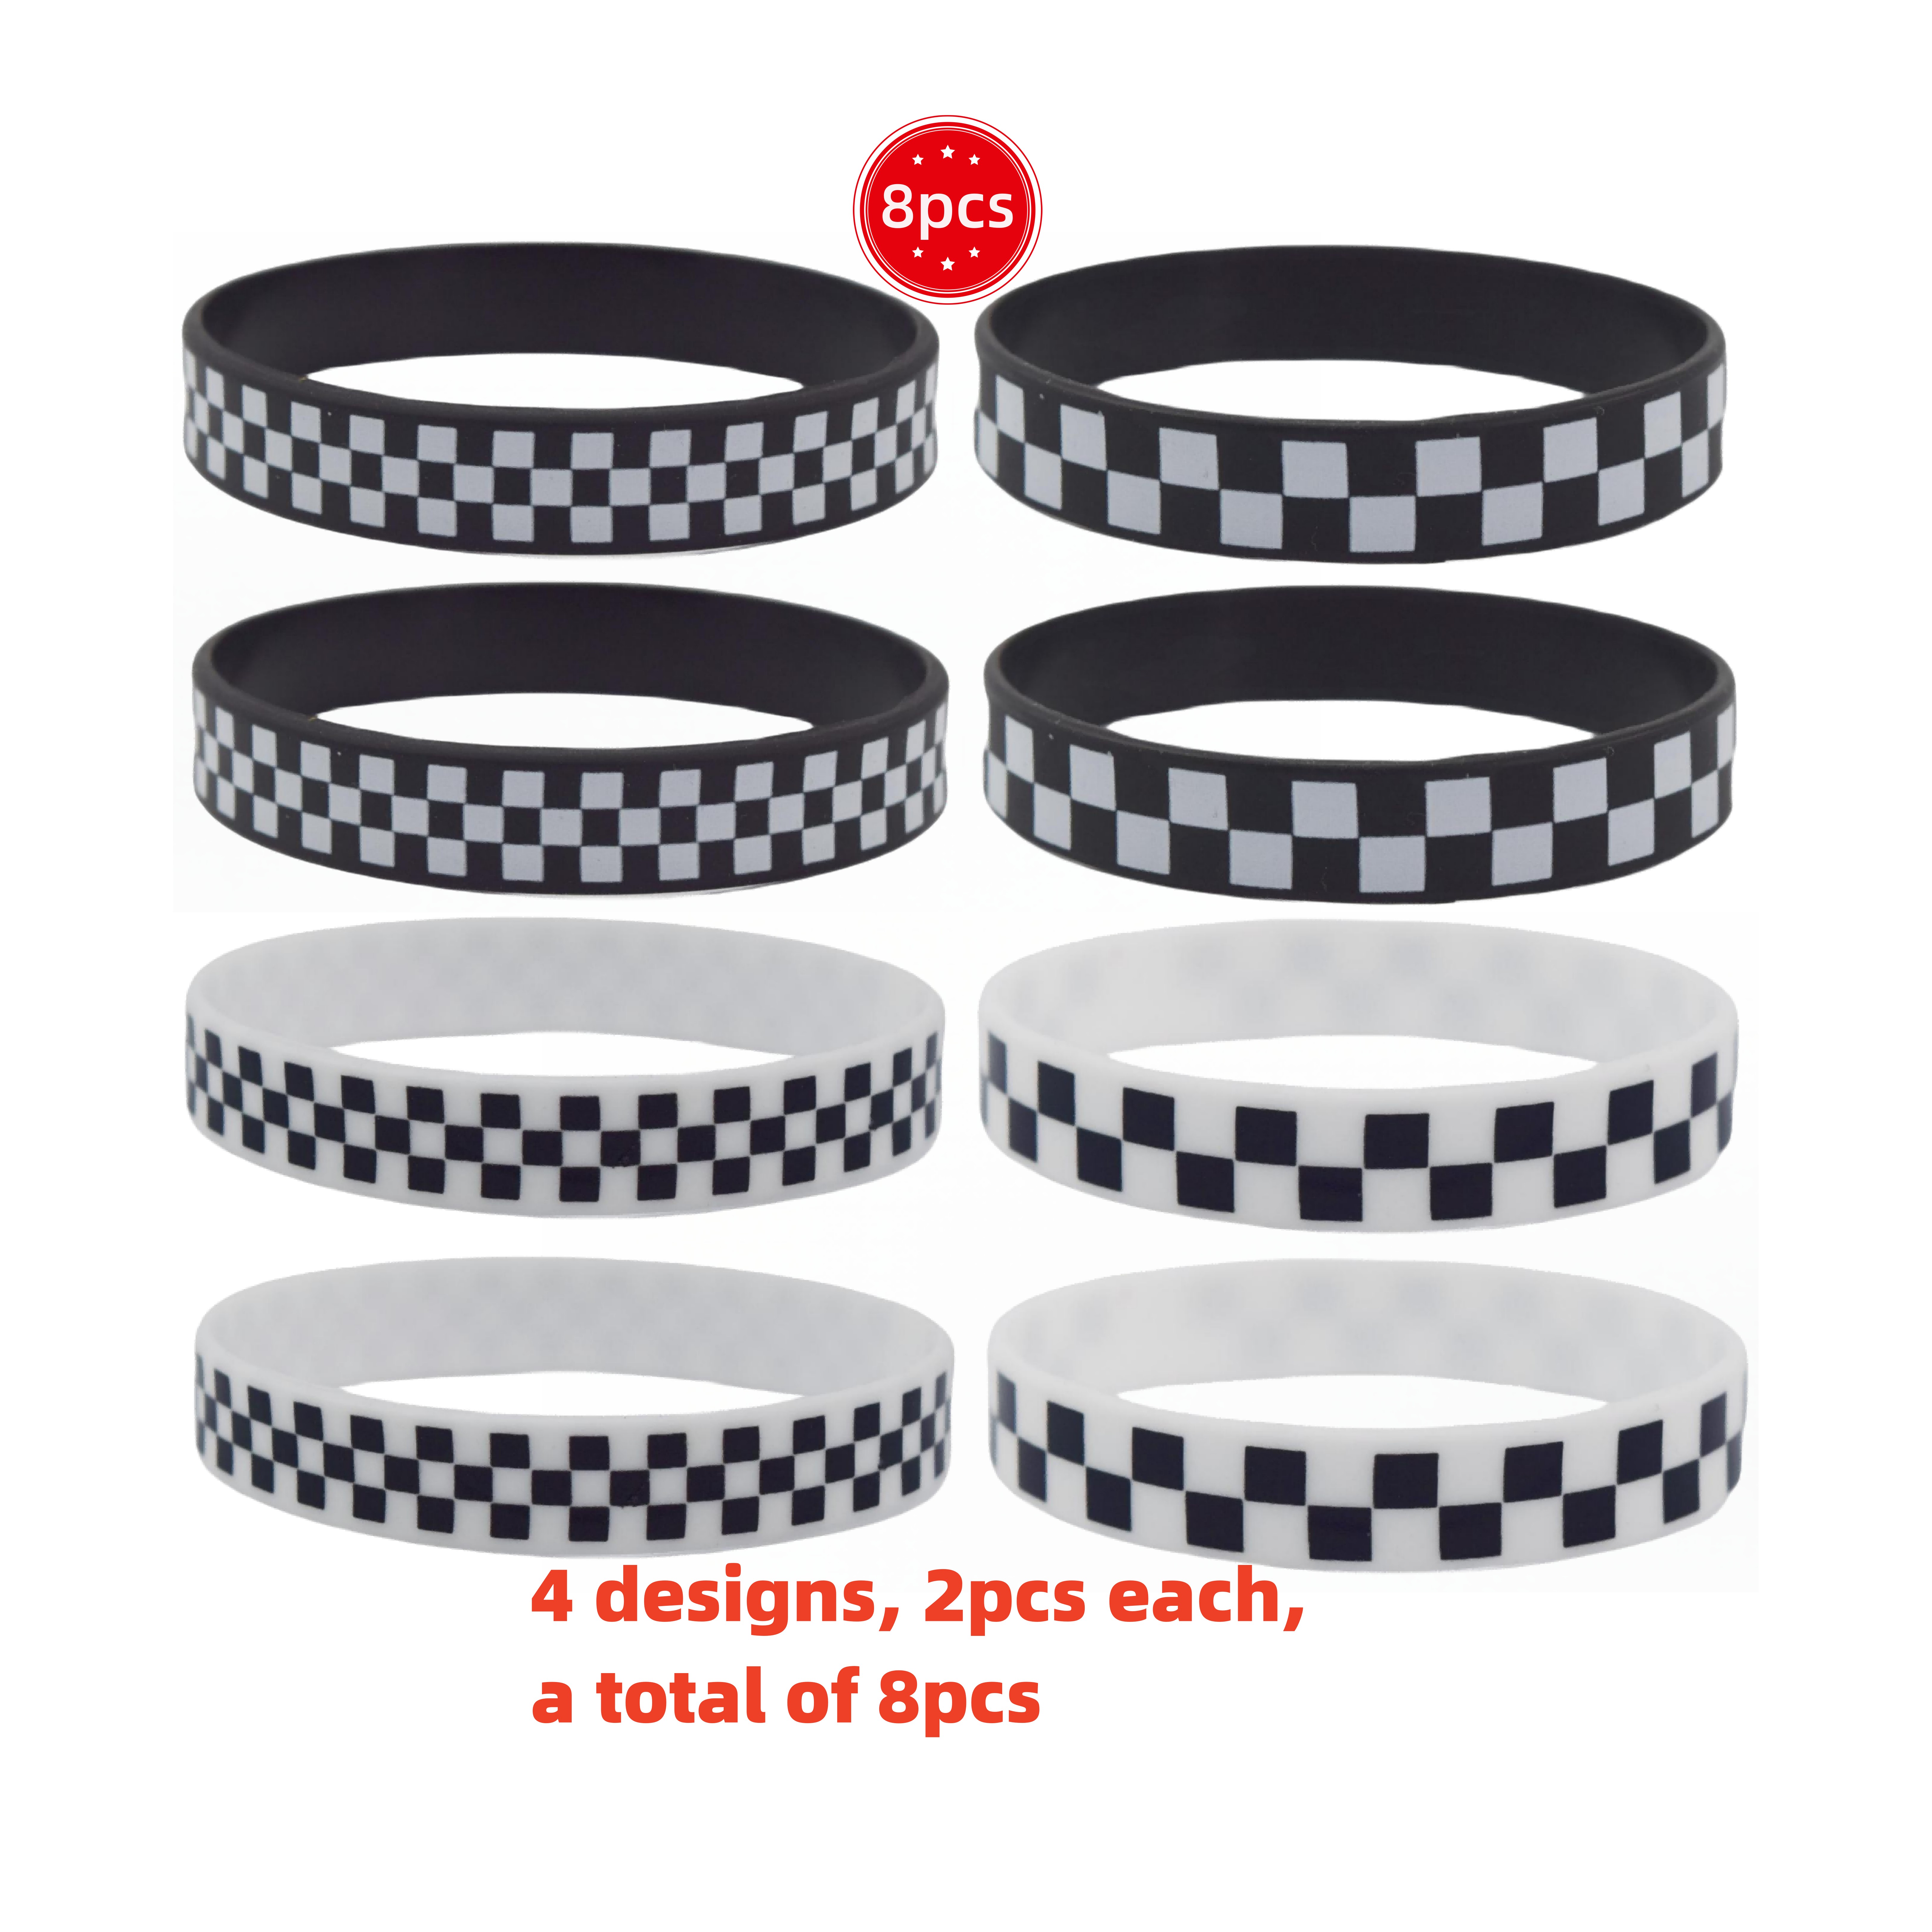 

8pcs Racing Silicone Wristband, Checkered Simple Fashion Wristband, Sports Wristband, Perfect Gift For Friend And Family